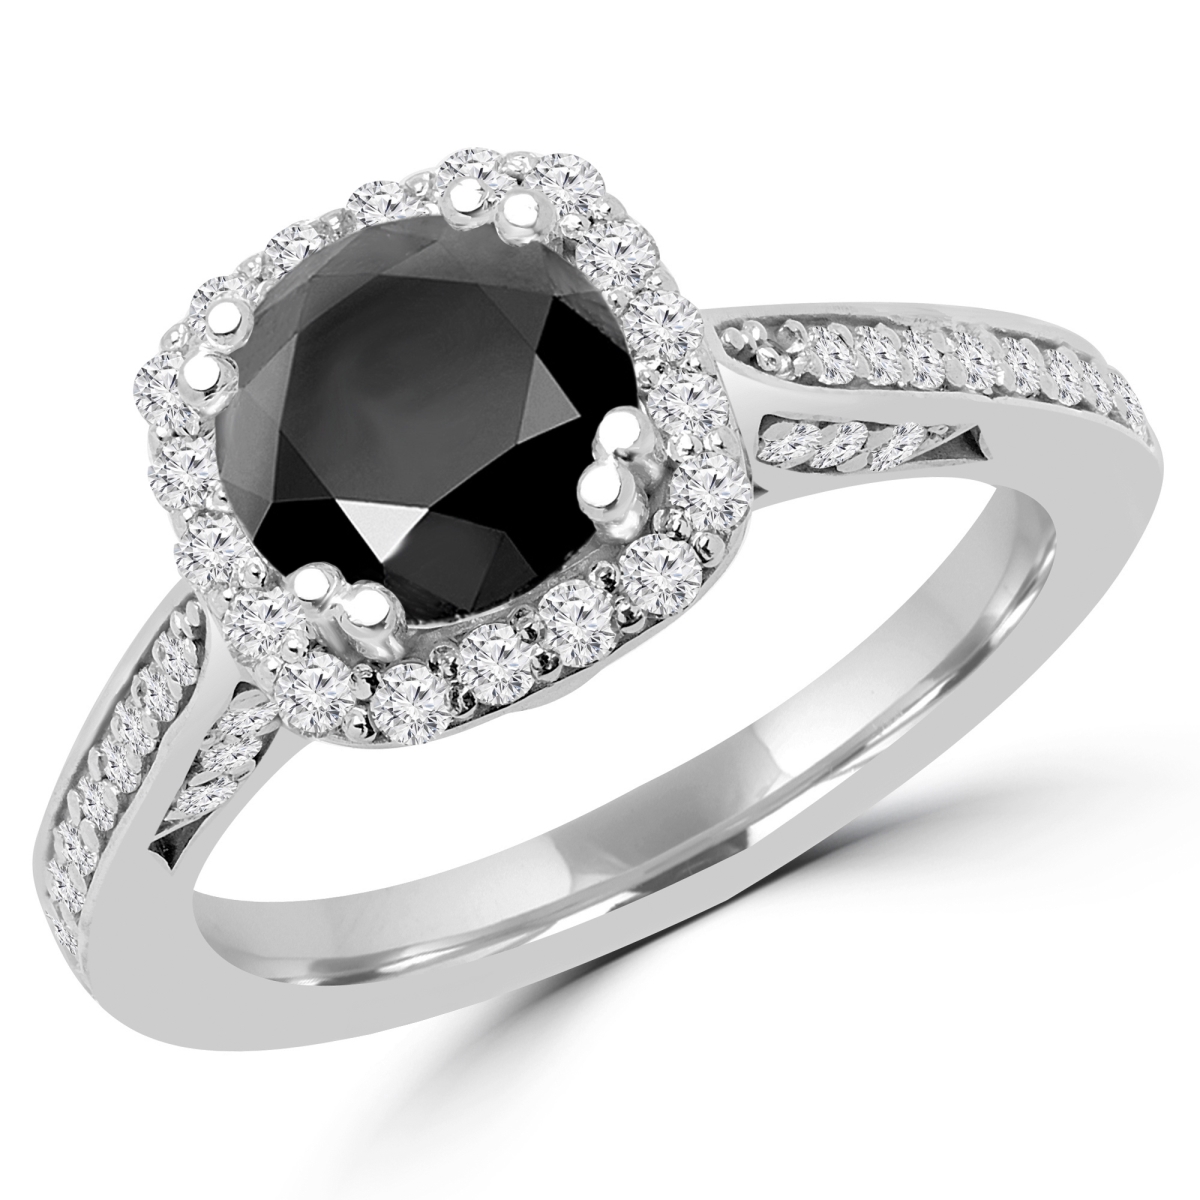 Picture of Majesty Diamonds MD170294-8.25 2.25 CTW Round Black Diamond Halo Engagement Ring in 18k White Gold - Size 8.25